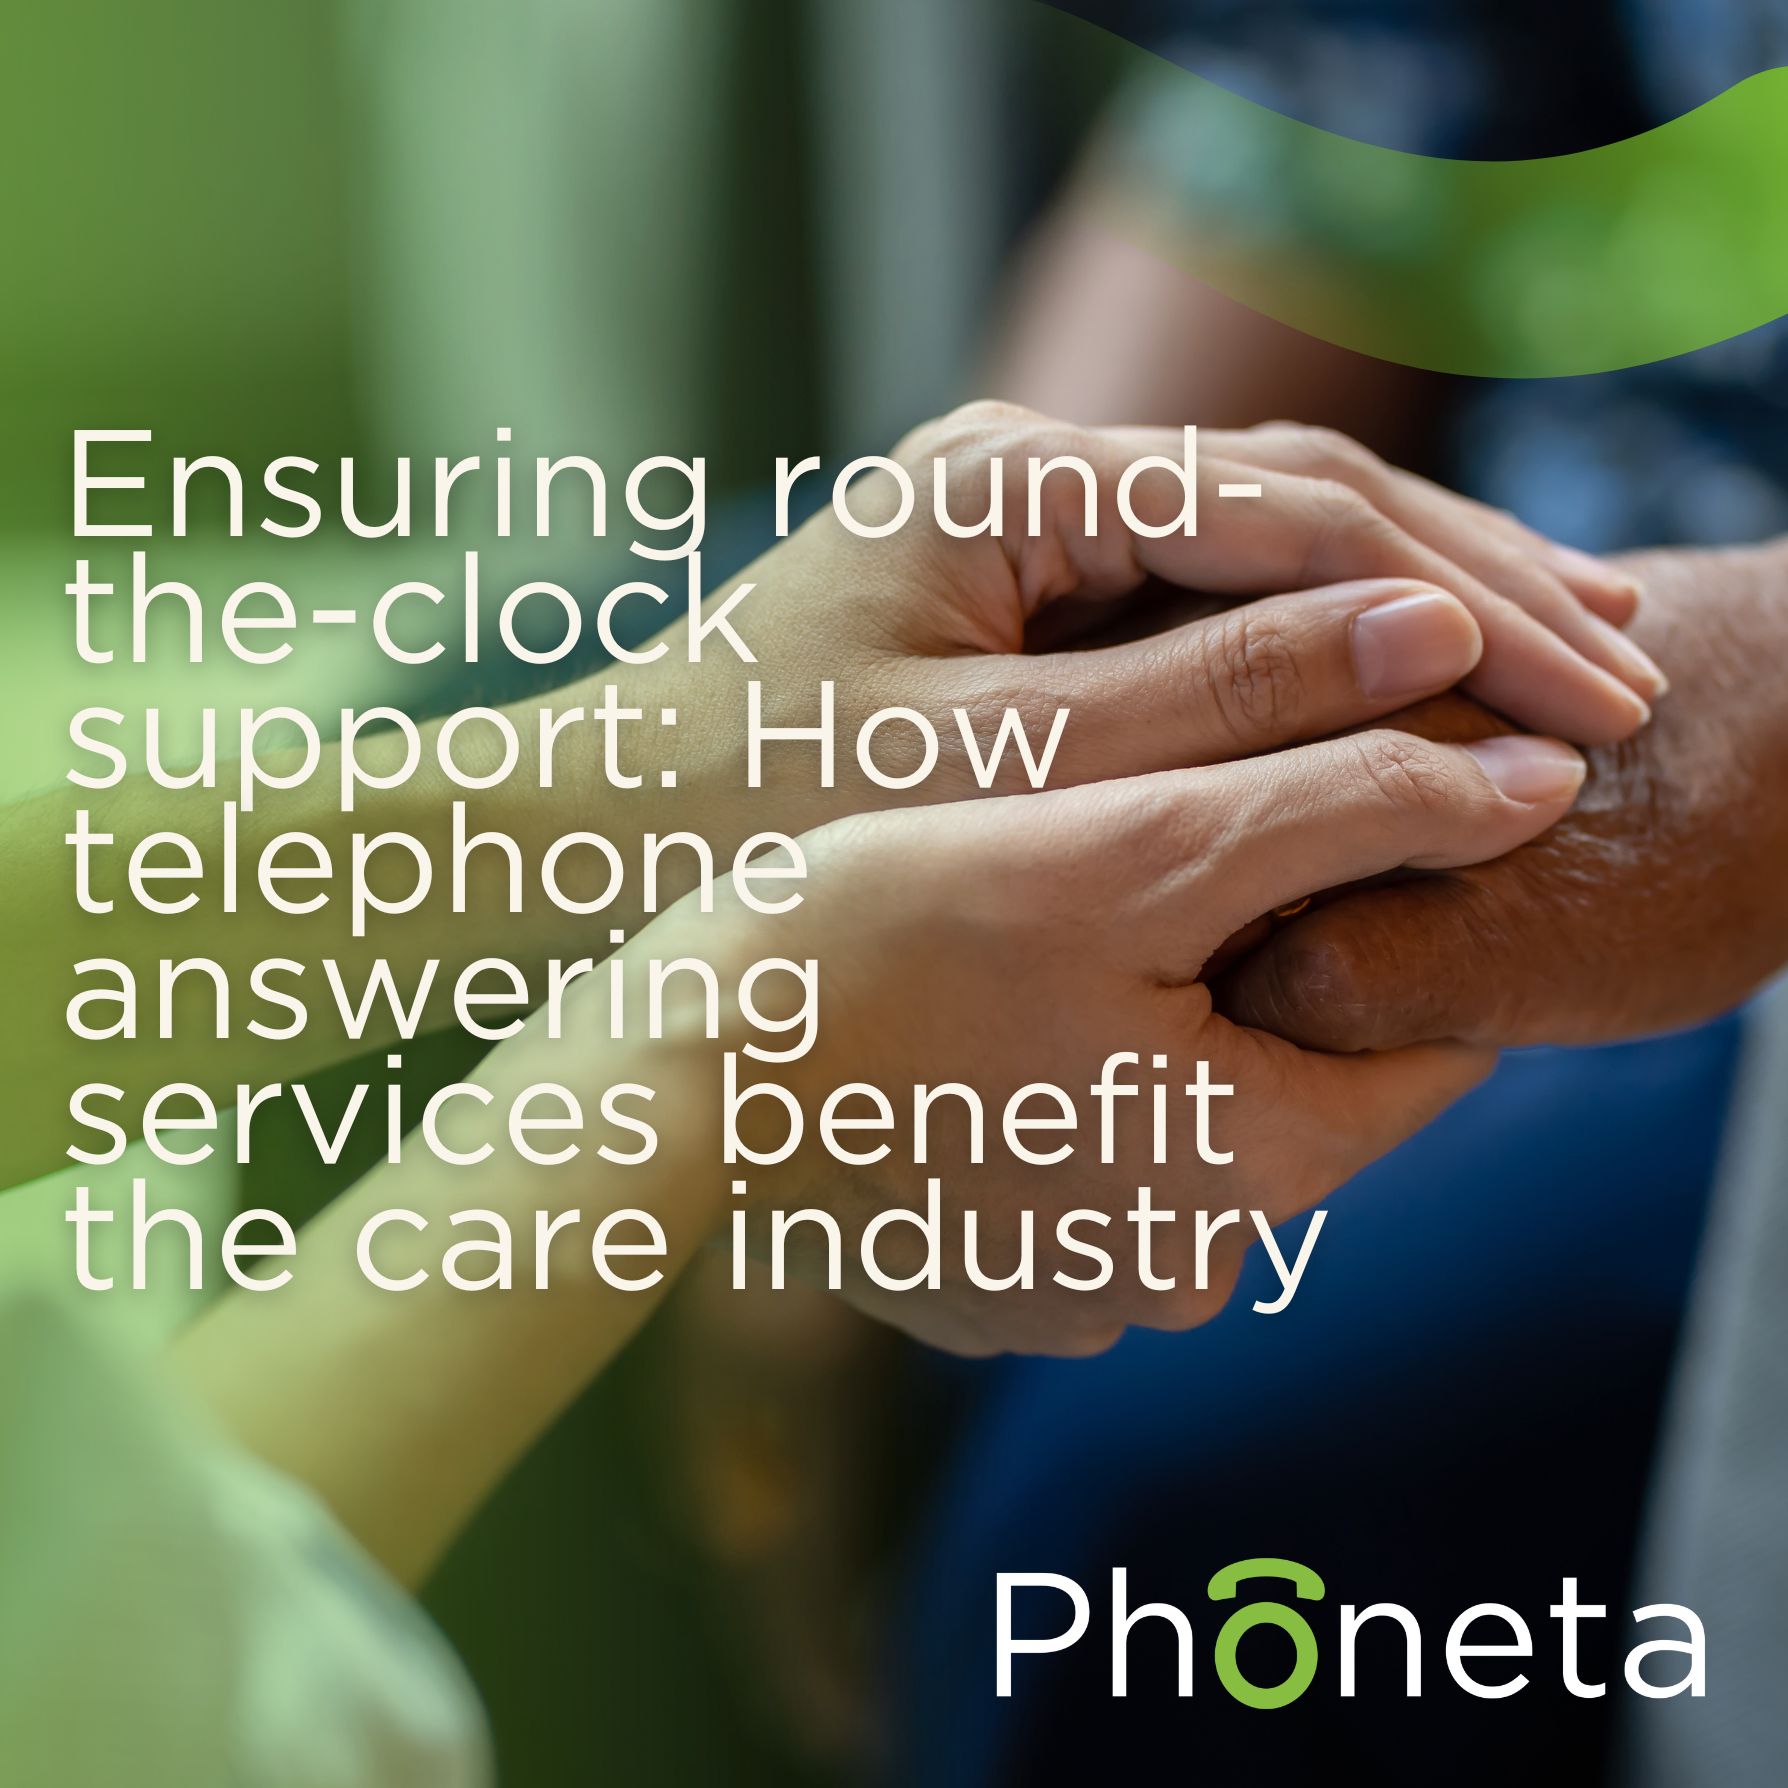 Ensuring round-the-clock support: How telephone answering services benefit the care industry 